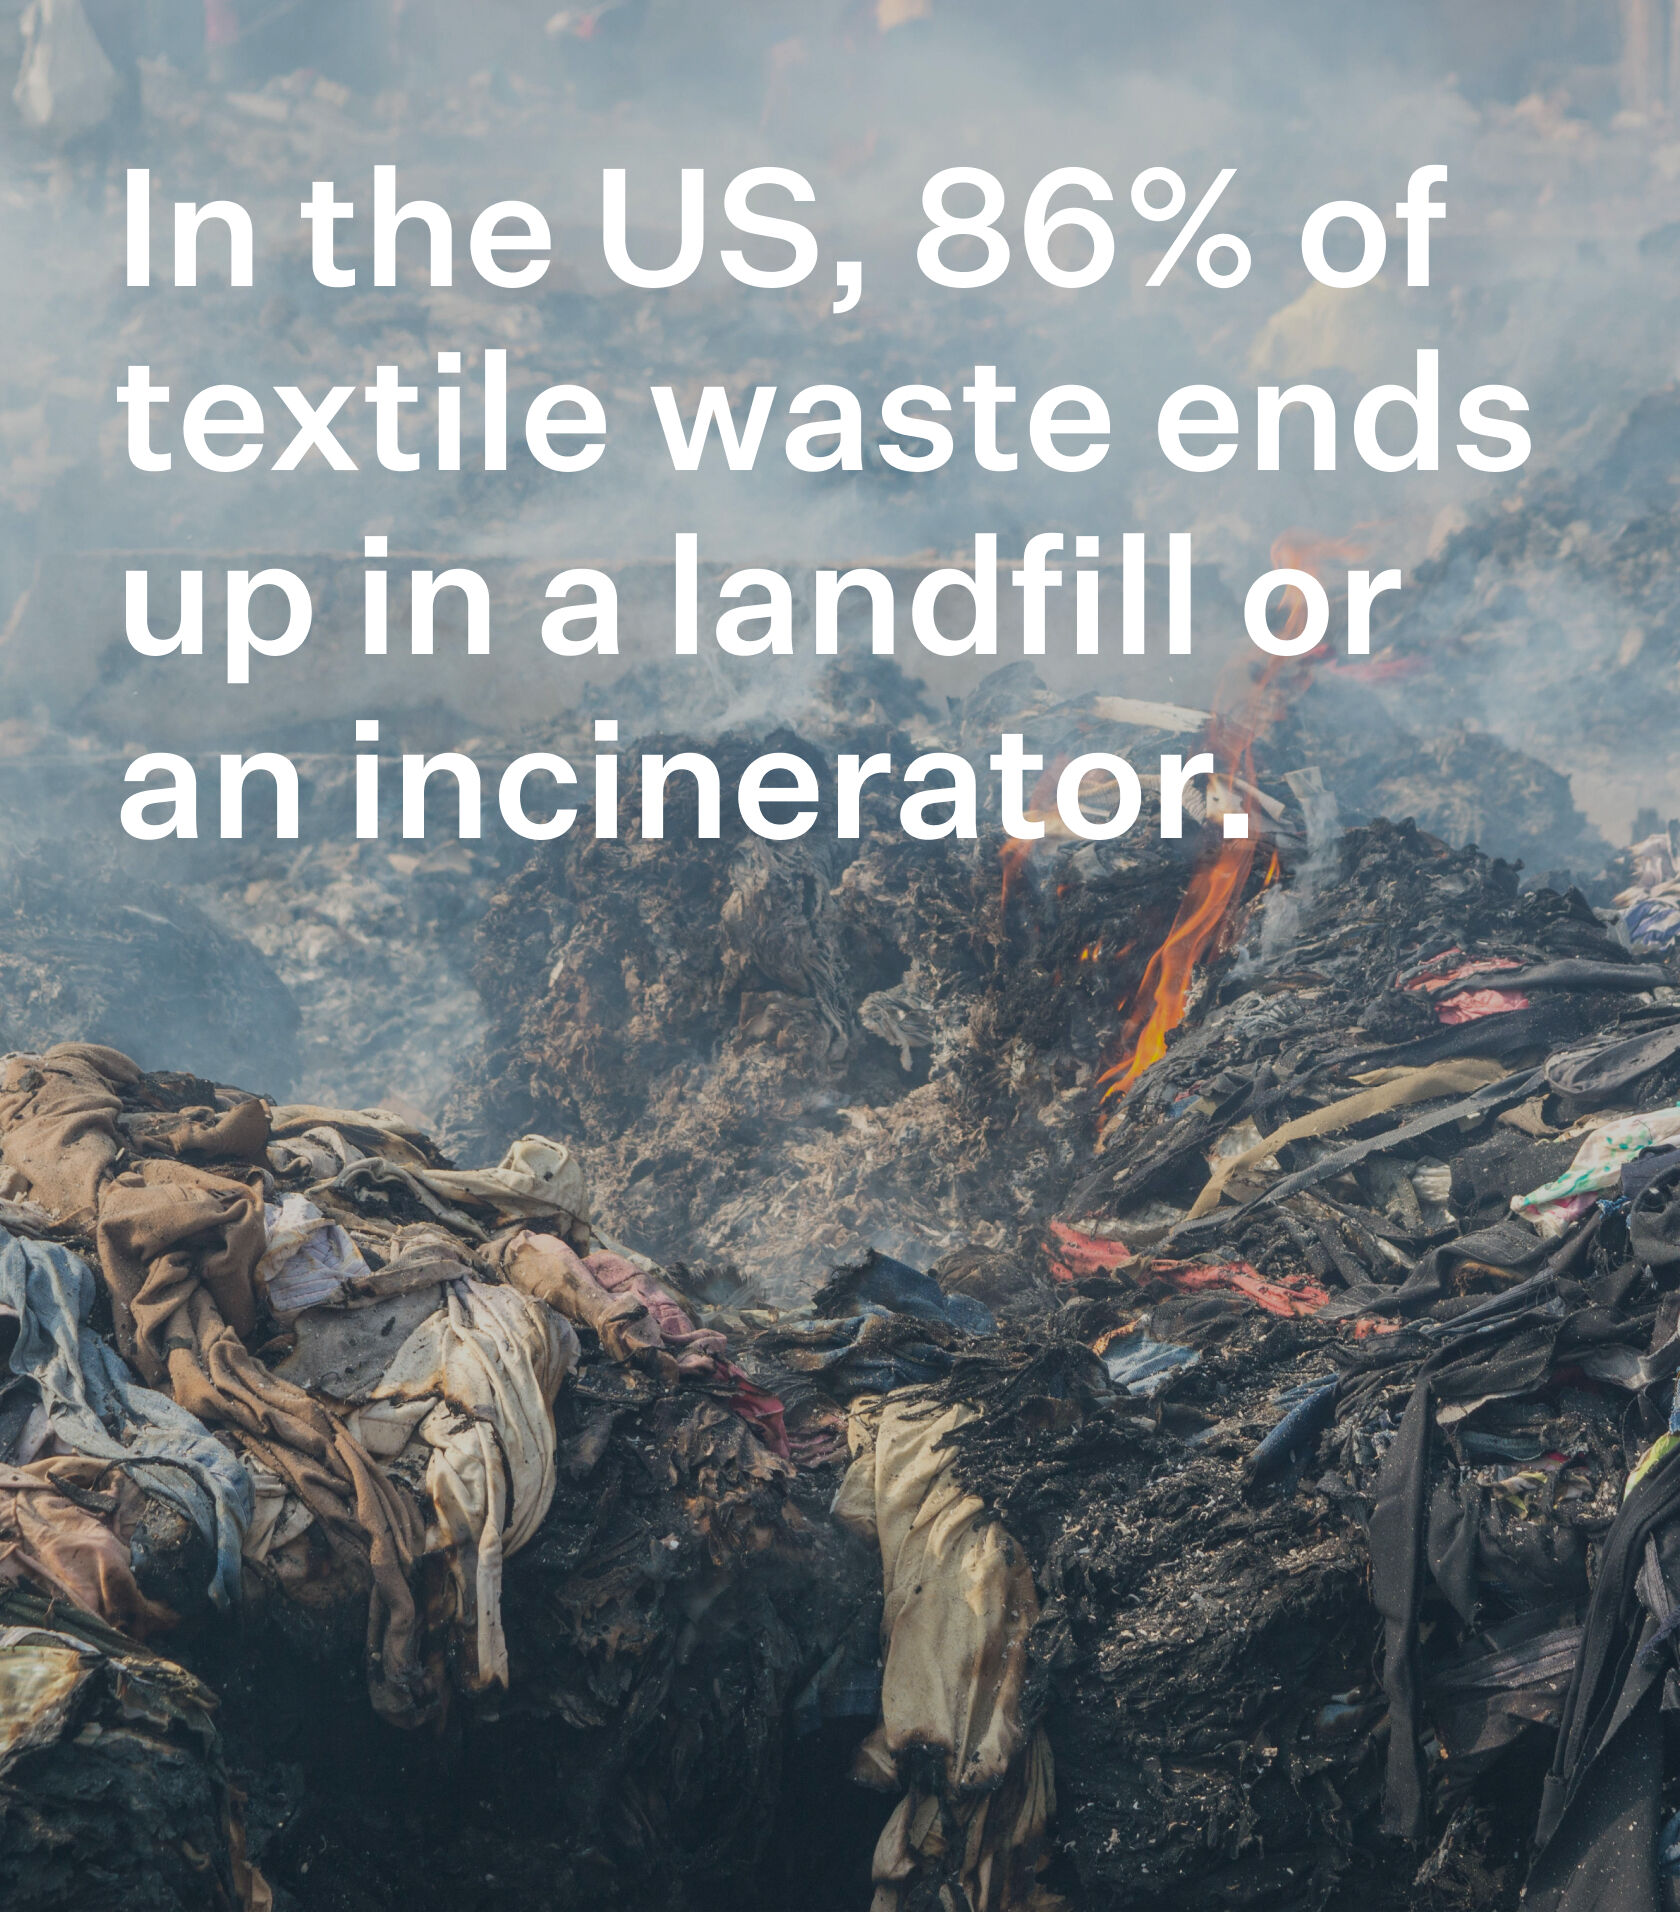 Clothing and textiles being burned n a landfill.